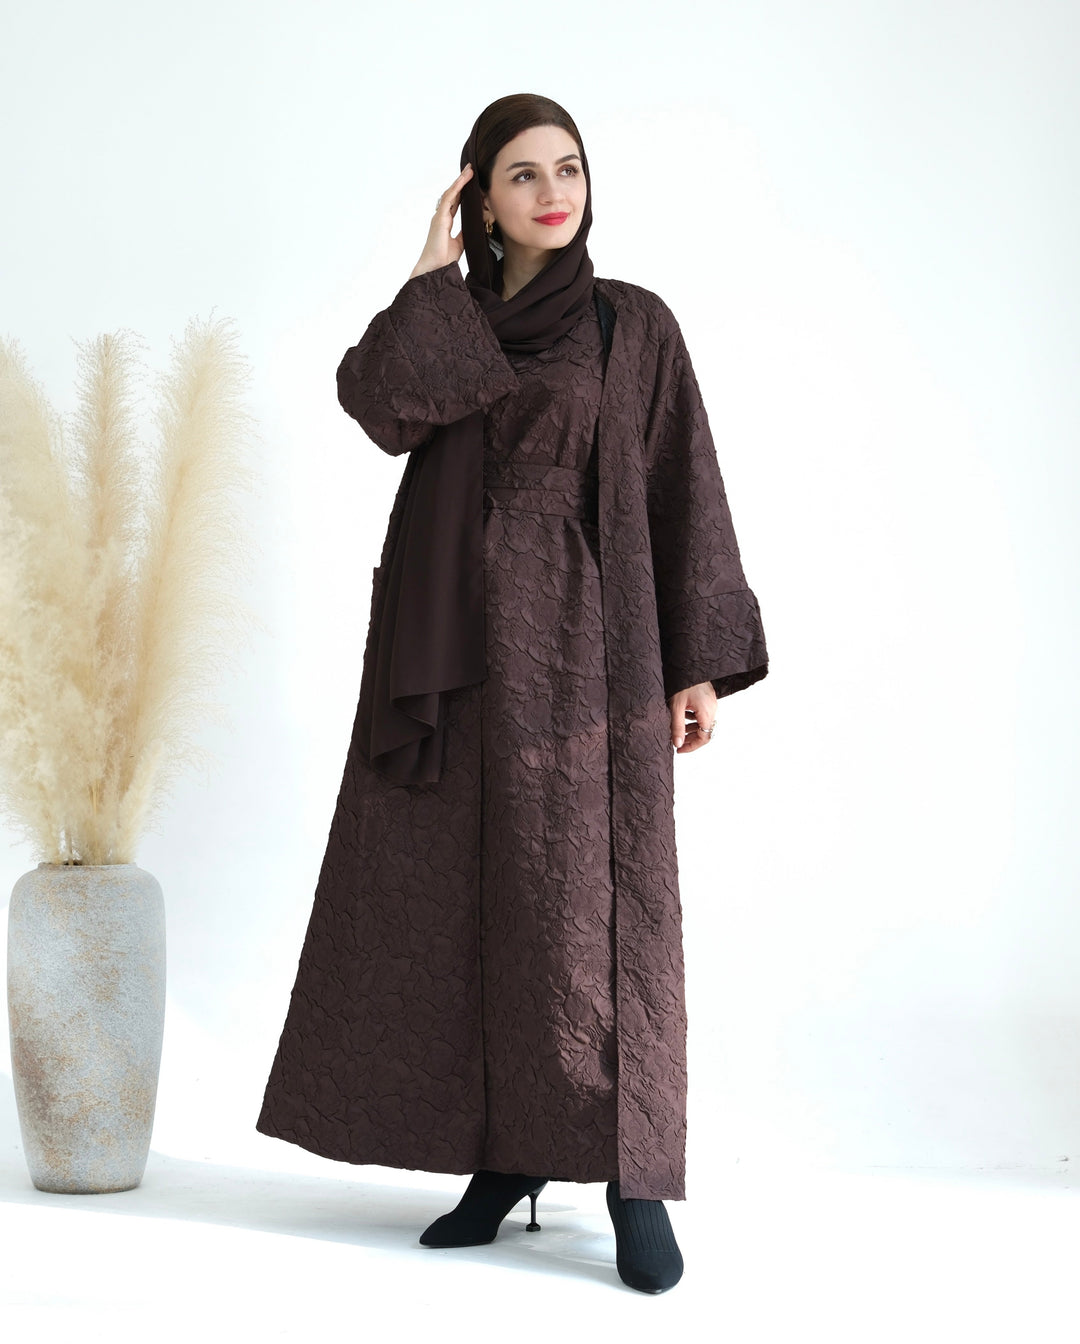 Get trendy with Eva Textured Abaya Set - Cocoa - Dresses available at Voilee NY. Grab yours for $94.90 today!